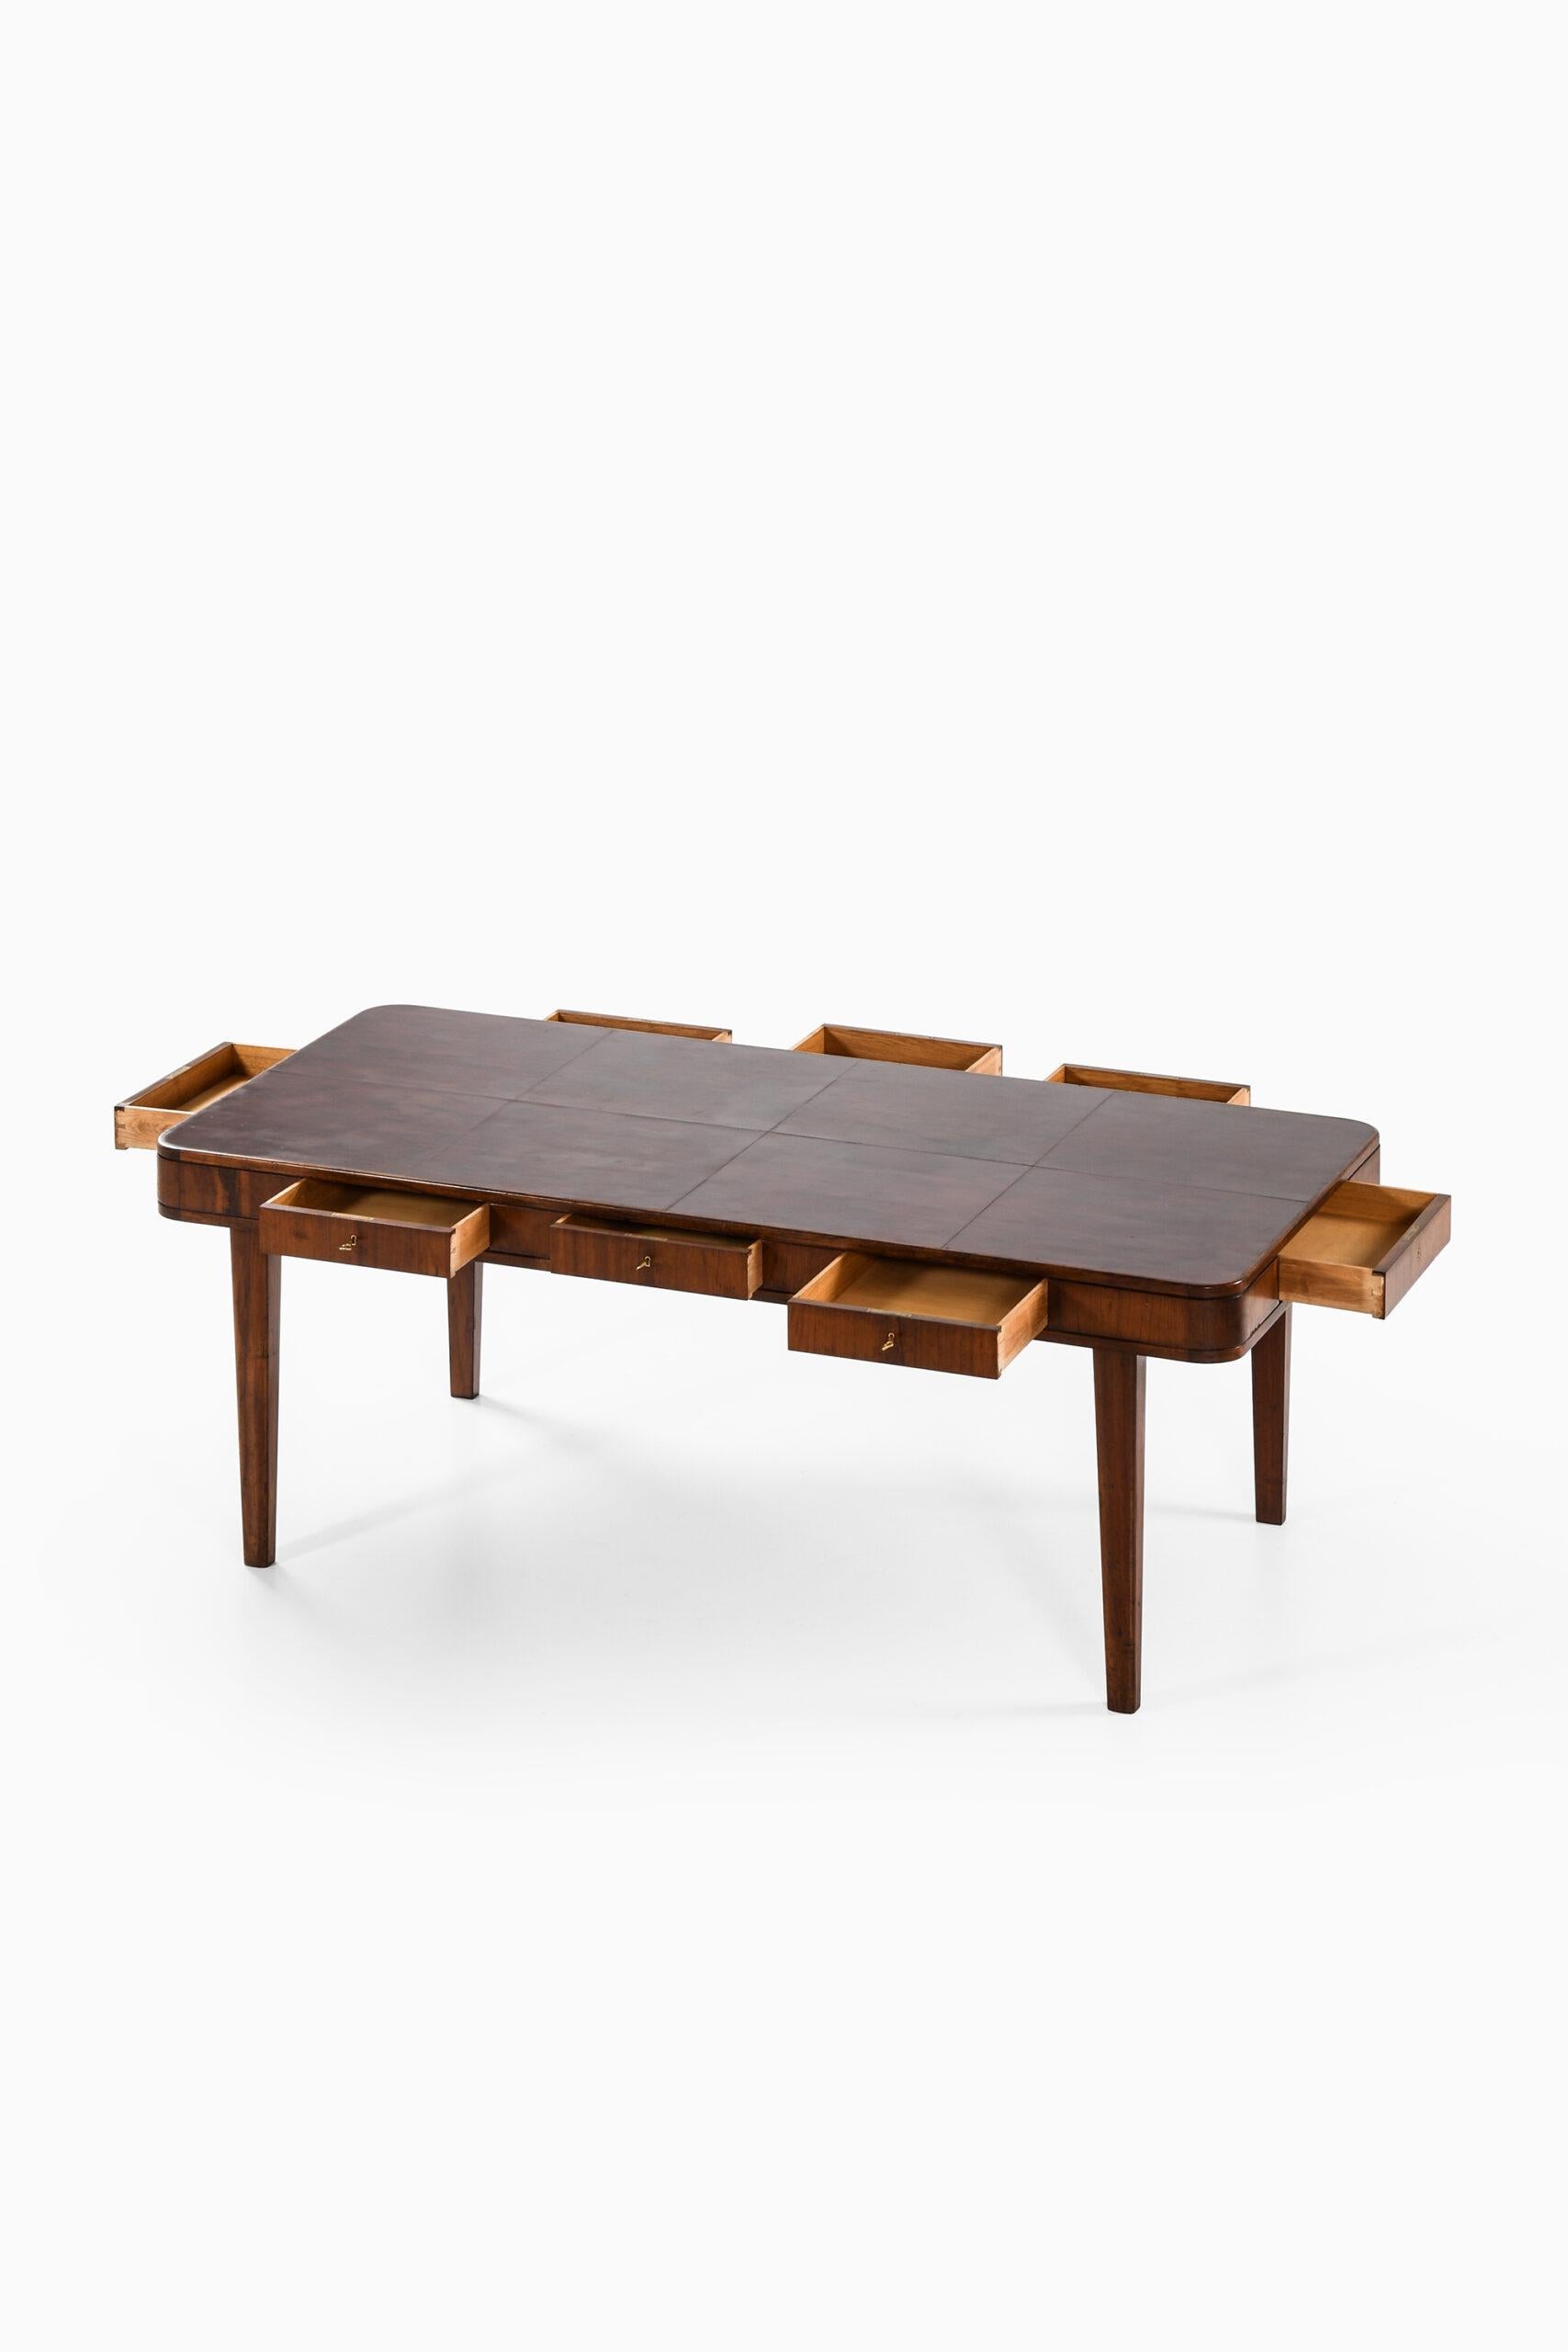 Scandinavian Modern Library Table Probably Produced by NK in Sweden